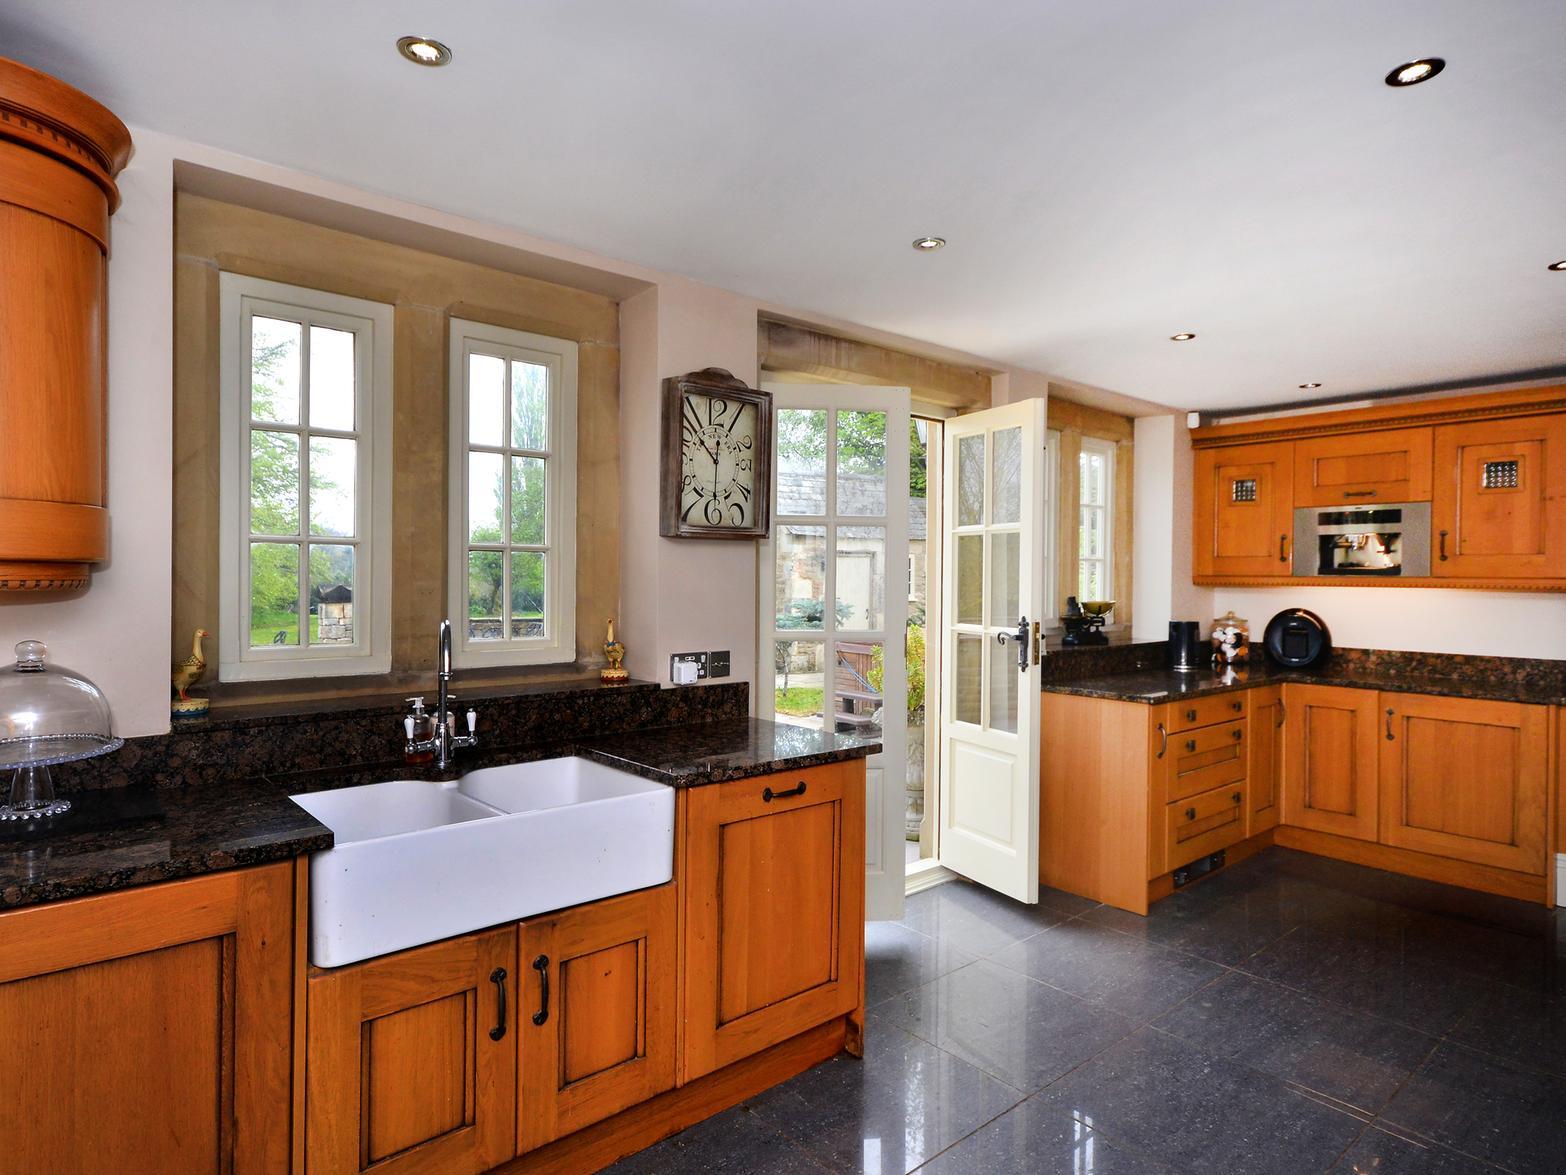 The large kitchen is next to a utility area to help cater for large numbers of people.